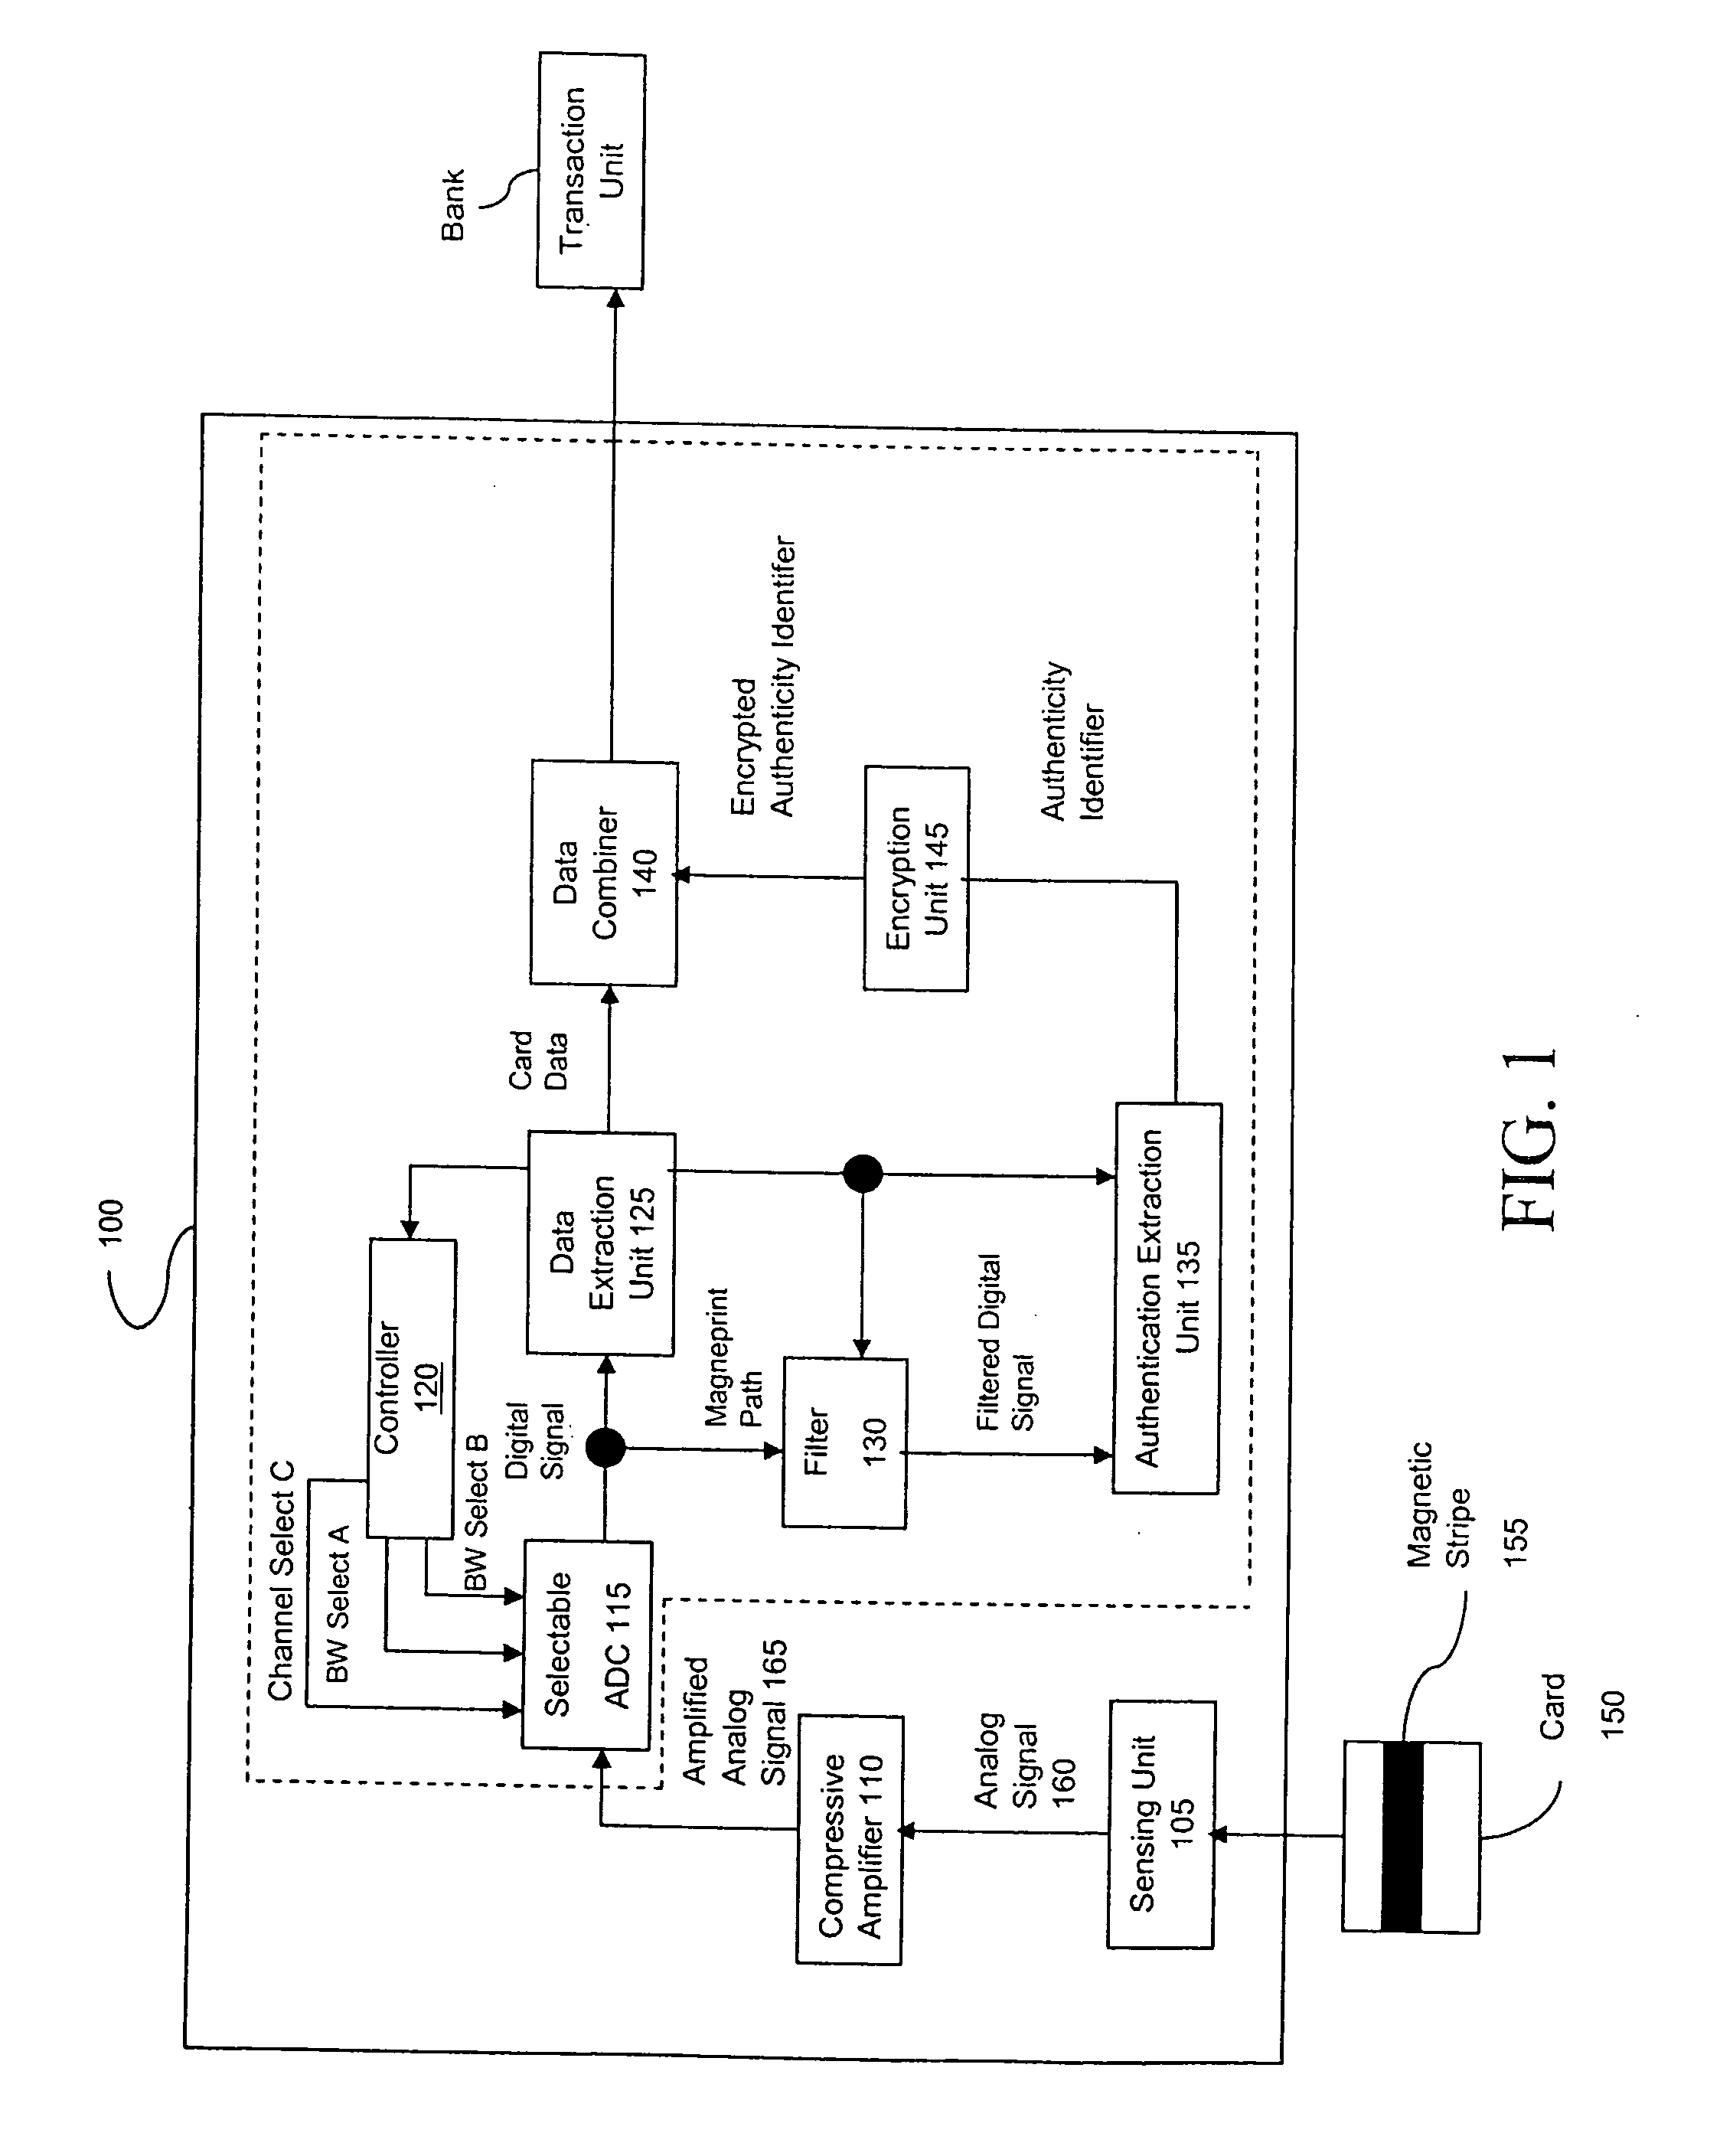 Method and apparatus for authenticating a magnetic fingerprint signal using compressive amplification